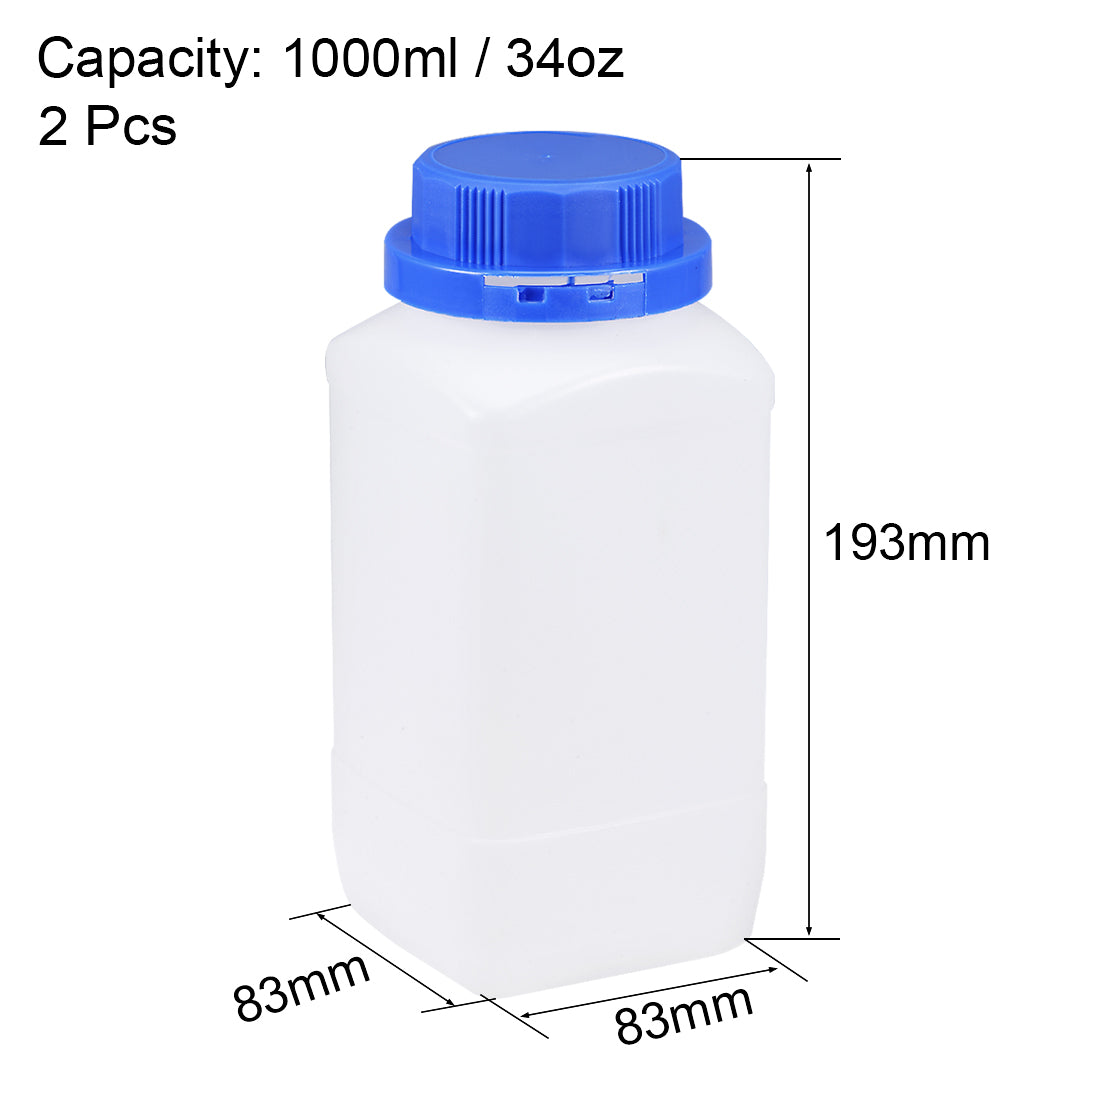 uxcell Uxcell Plastic Lab Chemical Reagent Bottle 1000ml/34oz Wide Mouth Sample Sealing Liquid Storage Container Translucent 2pcs